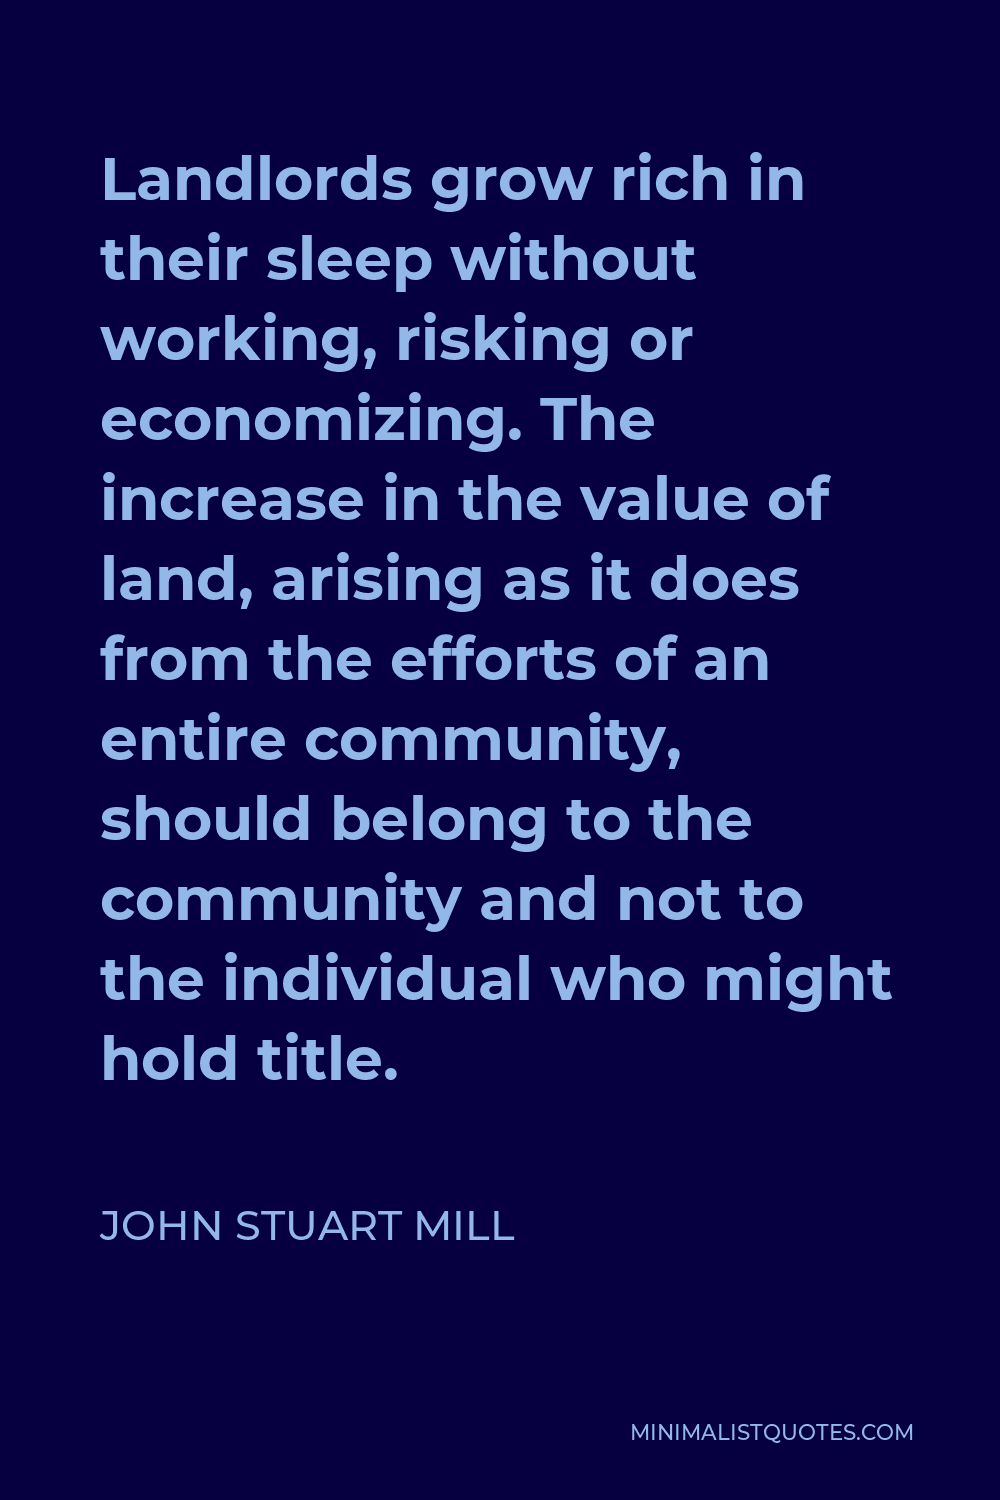 John Stuart Mill Quote - Landlords grow rich in their sleep without working, risking or economising.